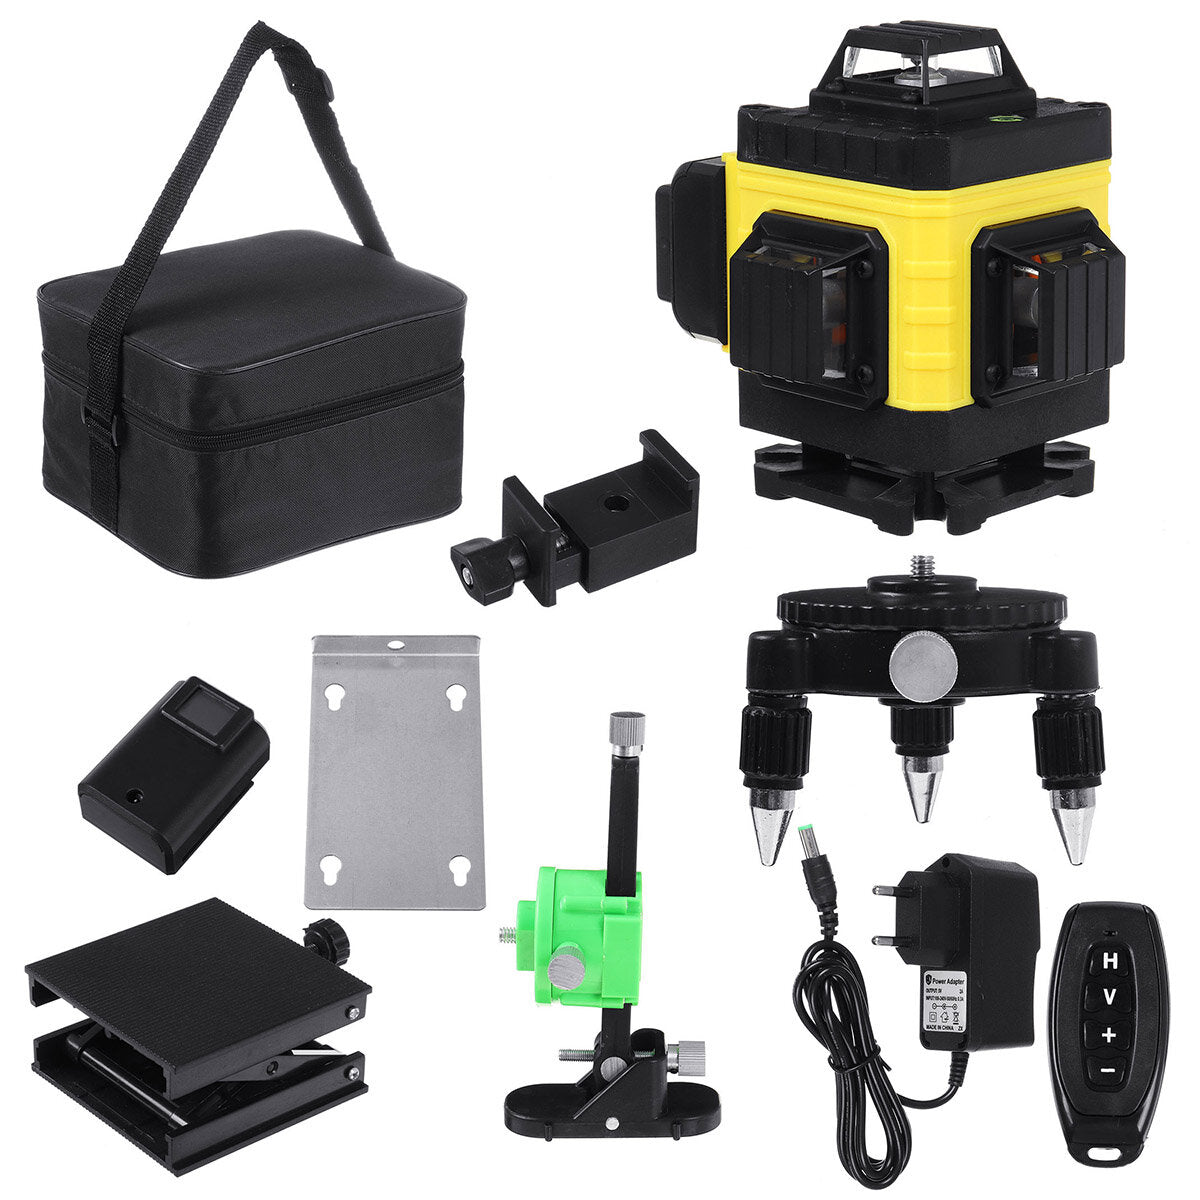 12/16 Line 4D Laser Level Green Light Digital Self Leveling 360 Rotary Measure with 6000mah Battery